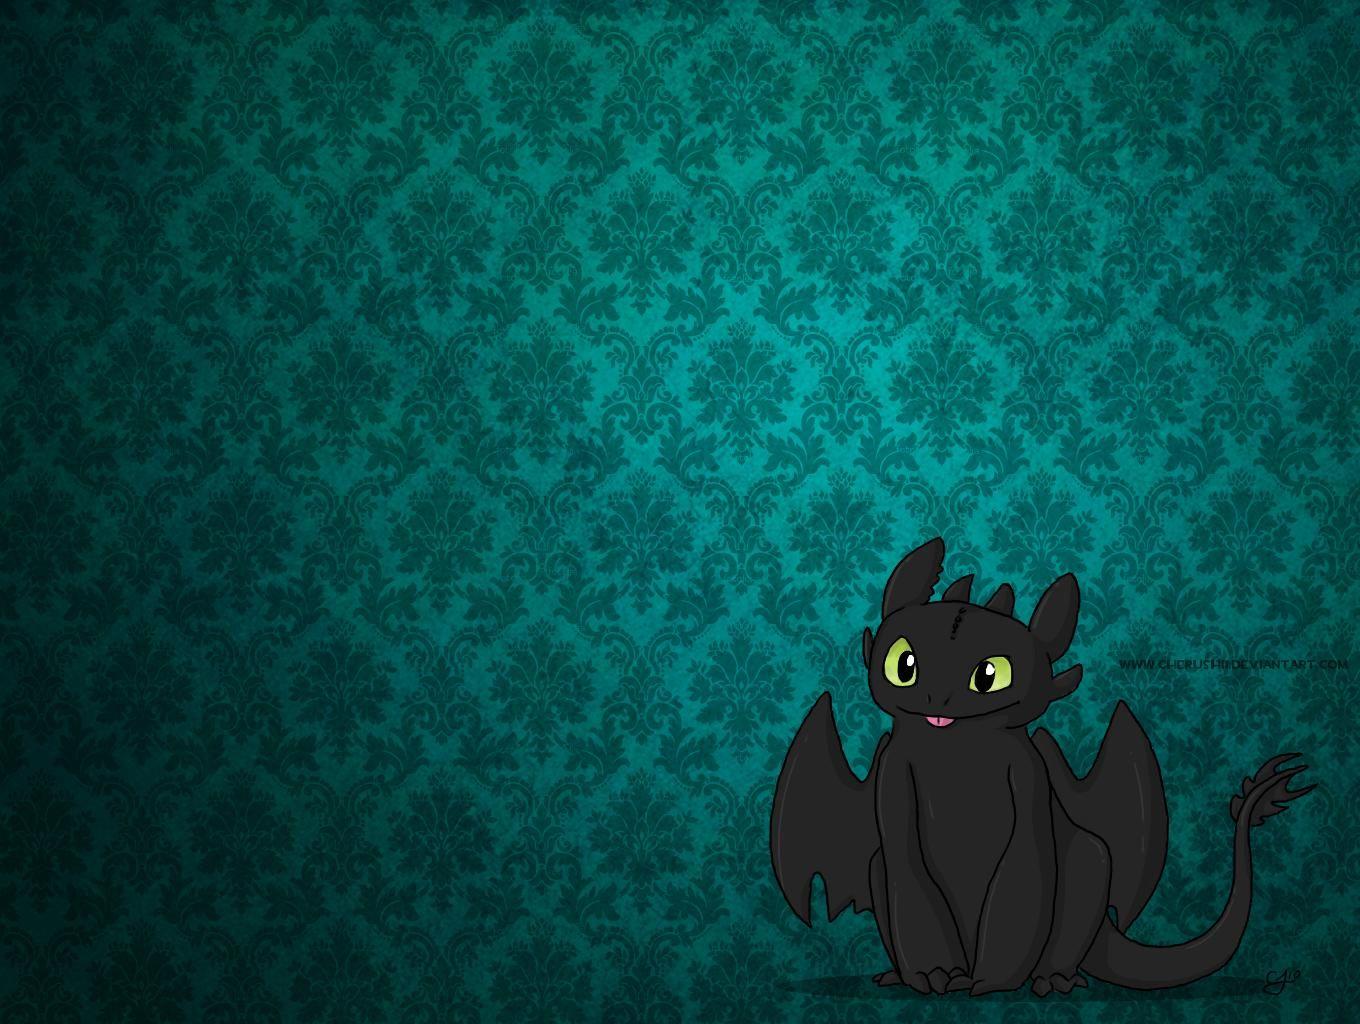 Toothless Wallpaper. Toothless wallpaper, How to train your dragon, How train your dragon